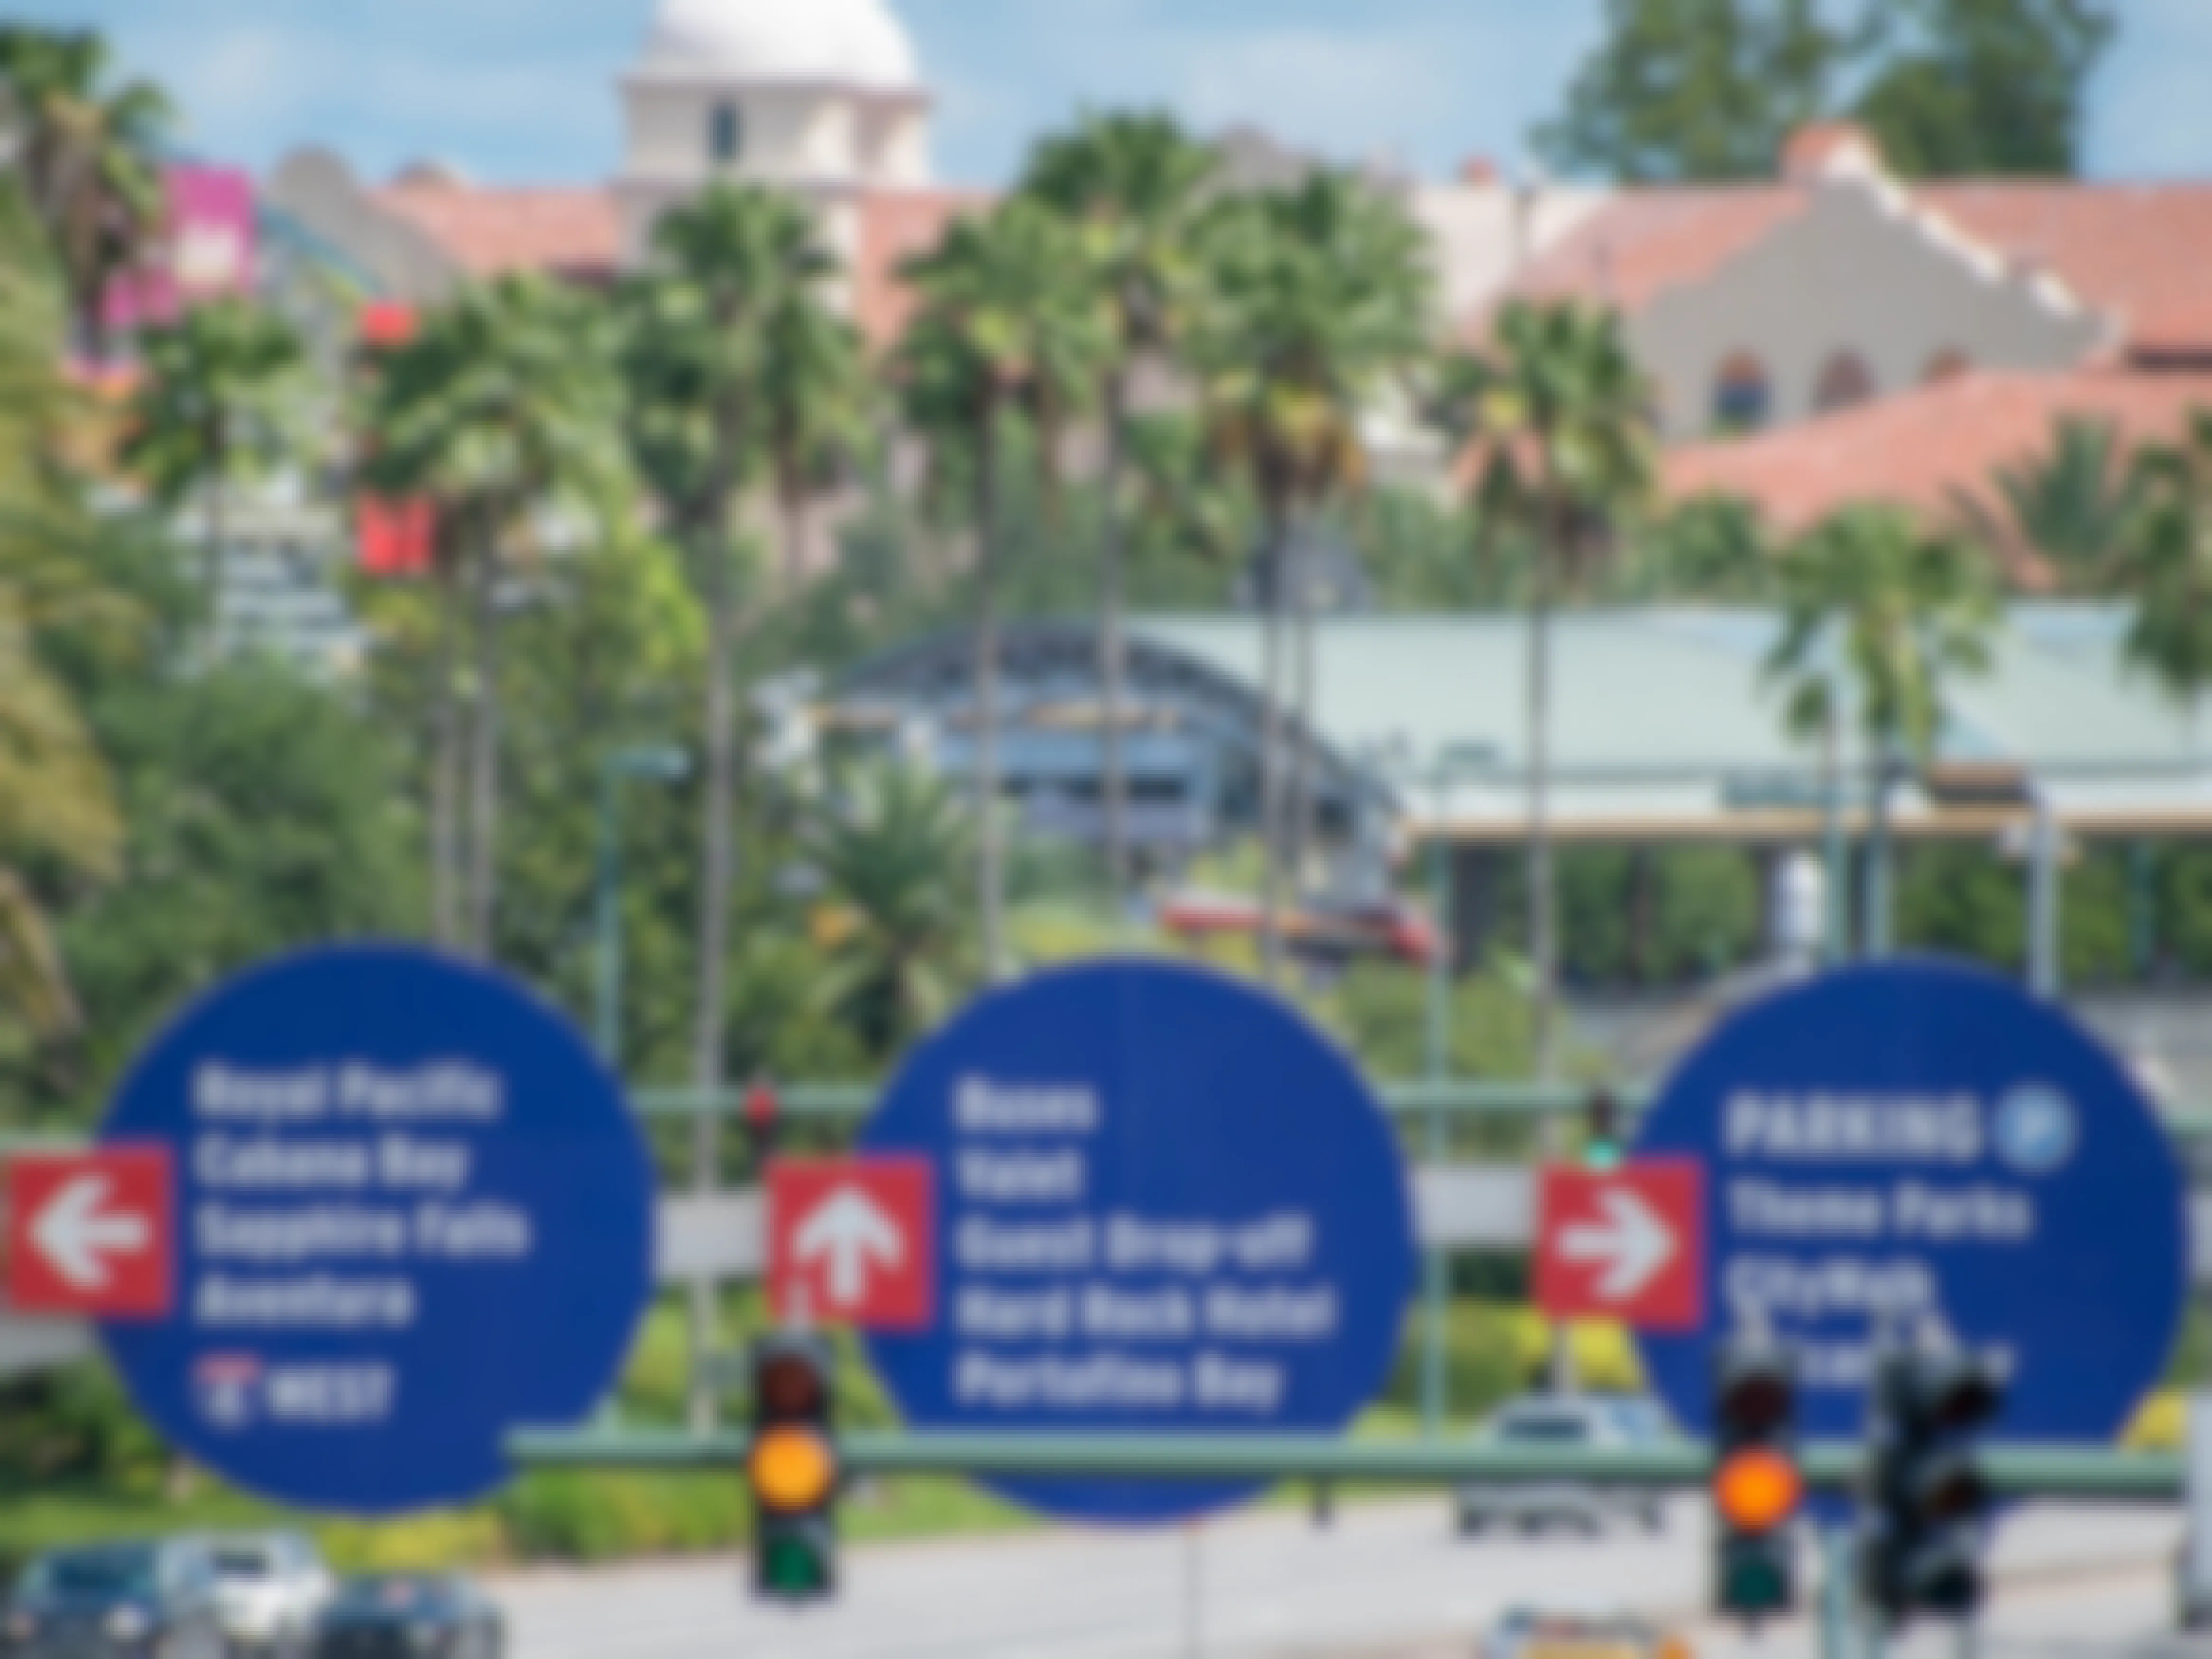 Top view of Hotel and Theme Park signs at Universal Studios area